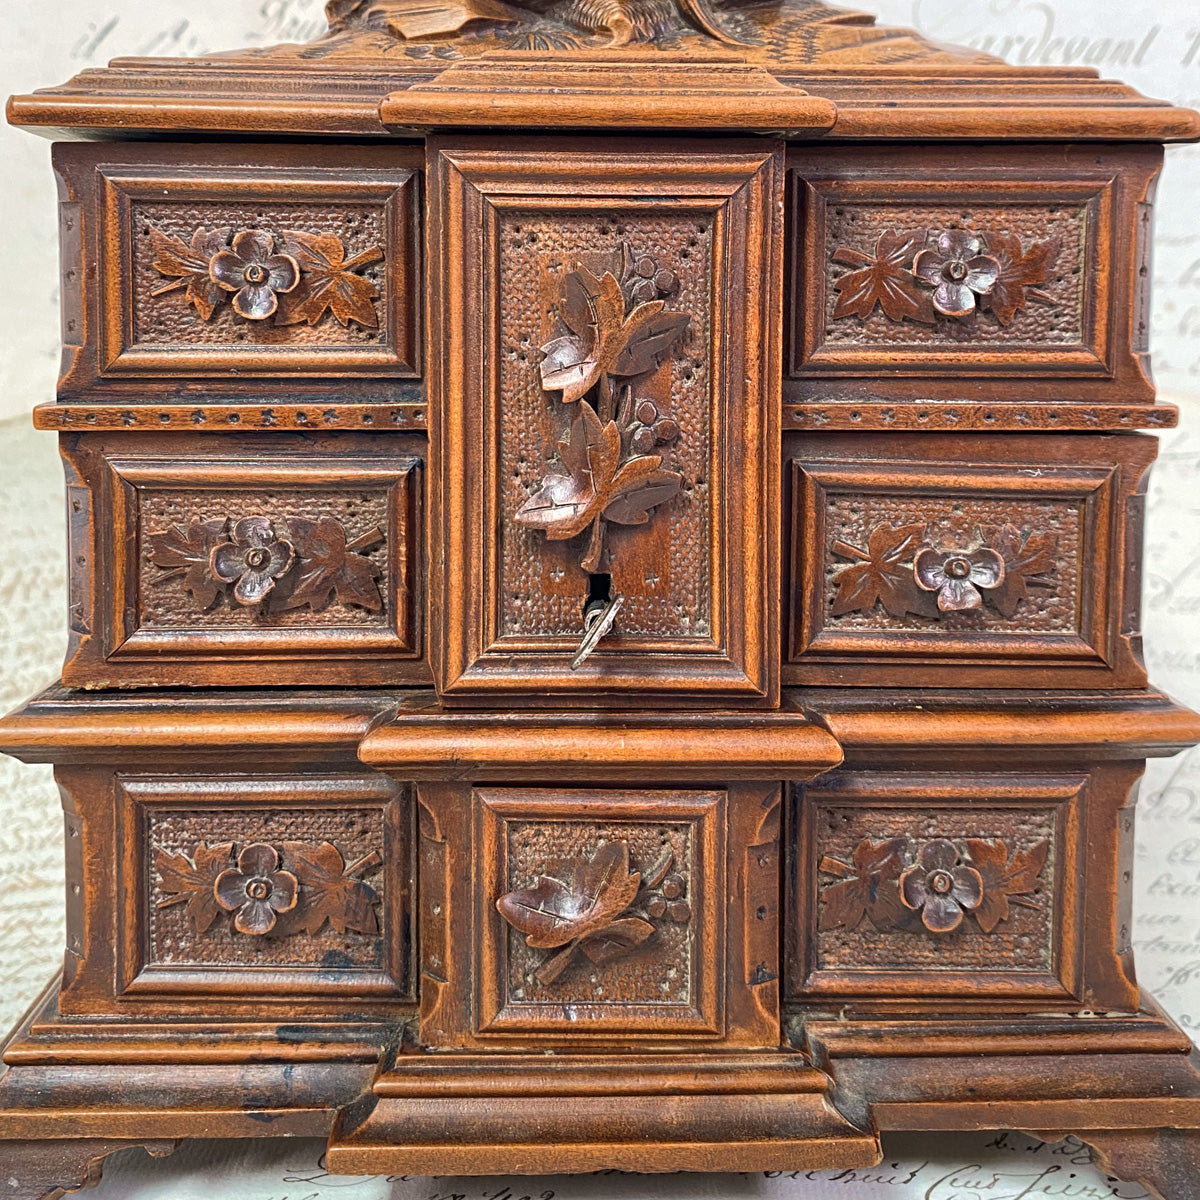 Lovely Antique Black Forest Carved 10" Tall Jewelry Chest, Box, Hinged Compartments, Birds & Nest